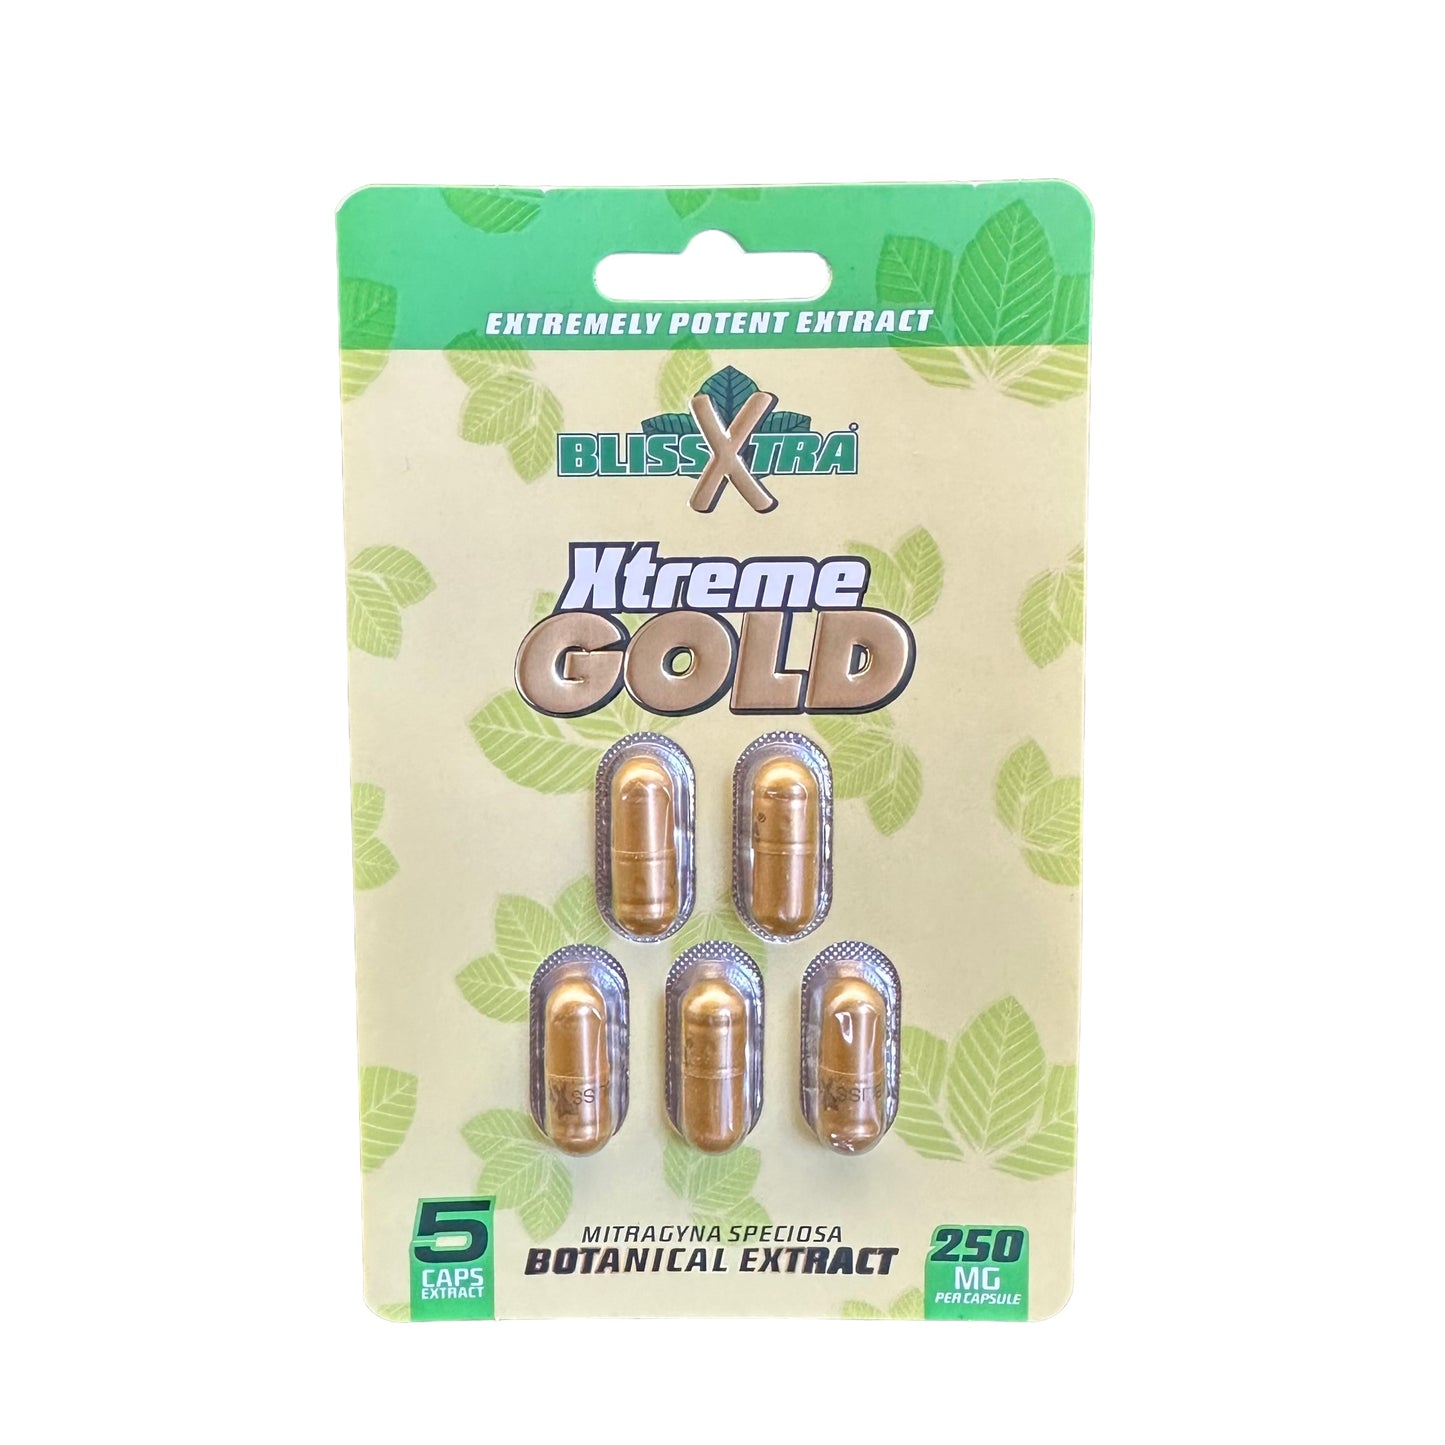 BlissXtra Xtreme Gold Extract Capsules (Capsule Count Options Available) (B2B)